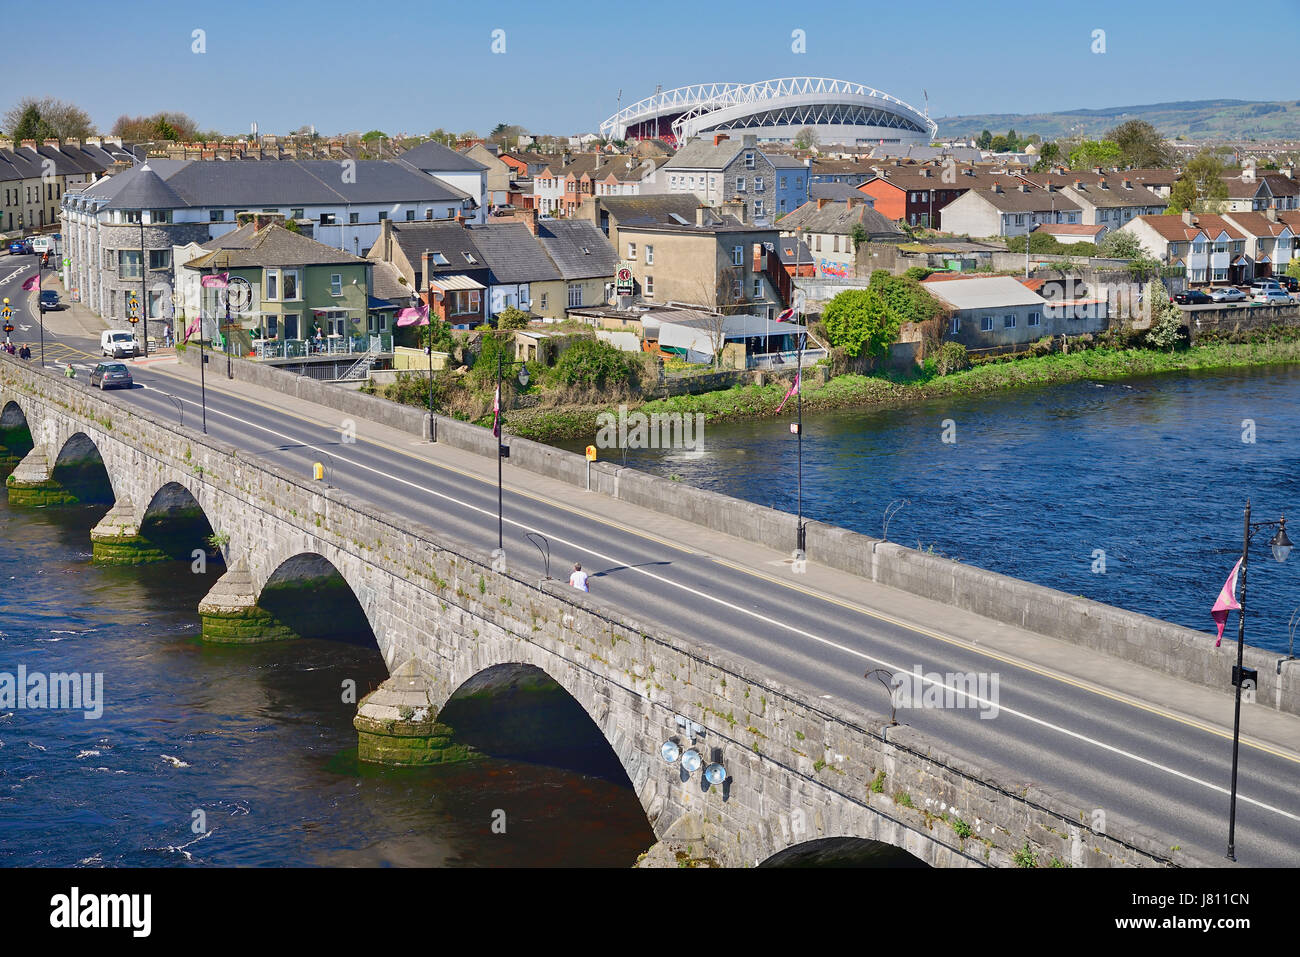 Ireland, County Limerick, Limerick City, Thomond Park Rugby Football ground seen from St Johns Castle with the River Shannon in the foreground. Stock Photo